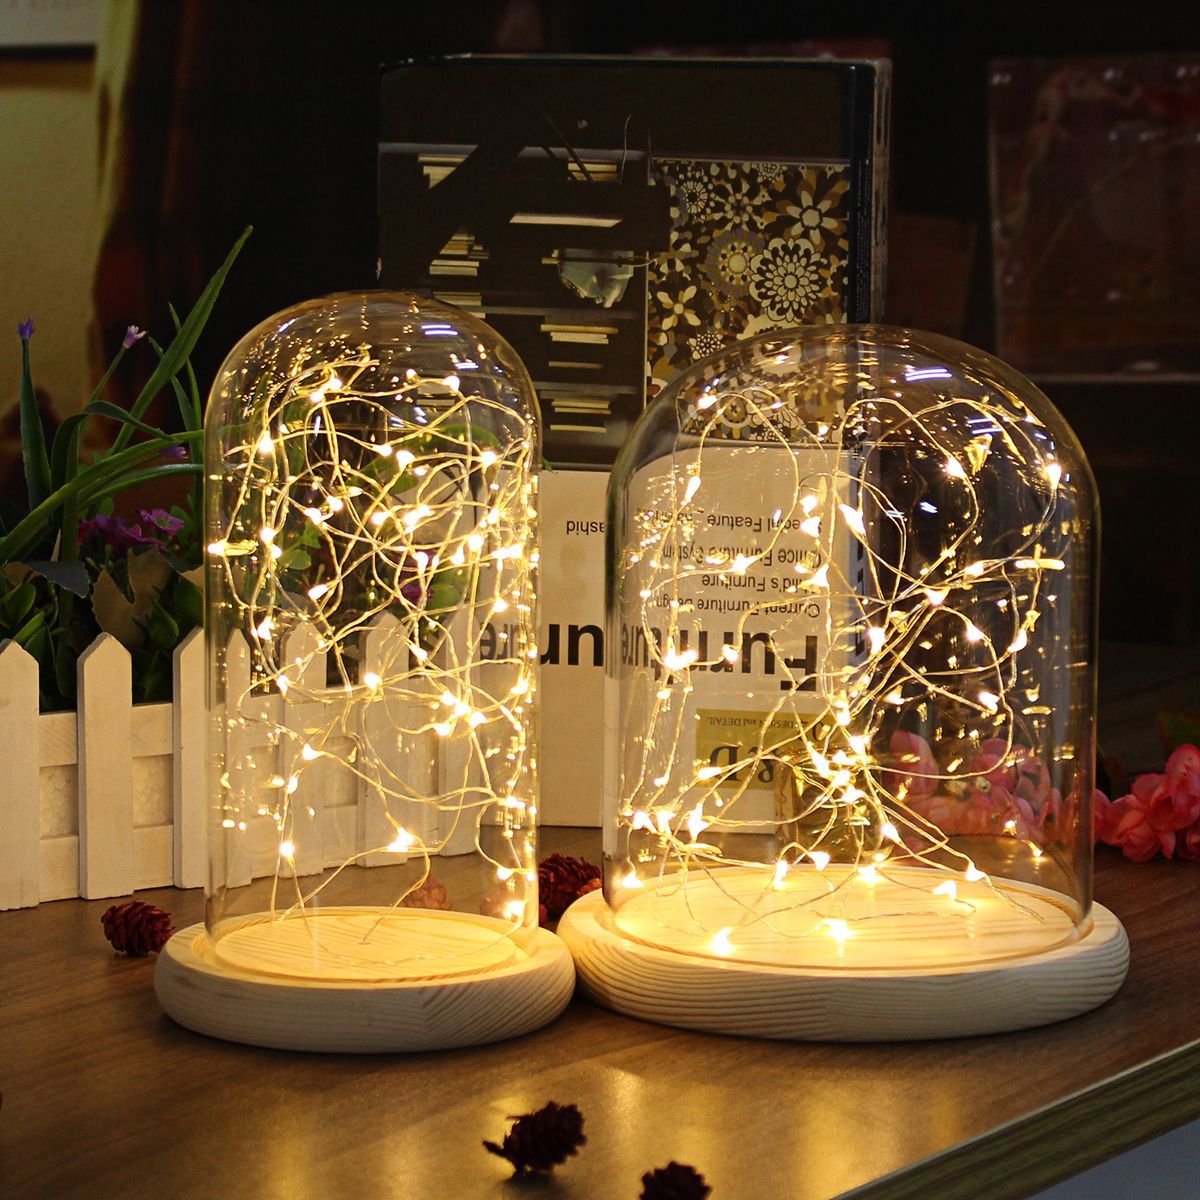 Clear-Glass-Display-Dome-Cloche-Bell-Jar-Wooden-Base-DIY-Decorations-With-20-LED-Fairy-String-Light-1361173